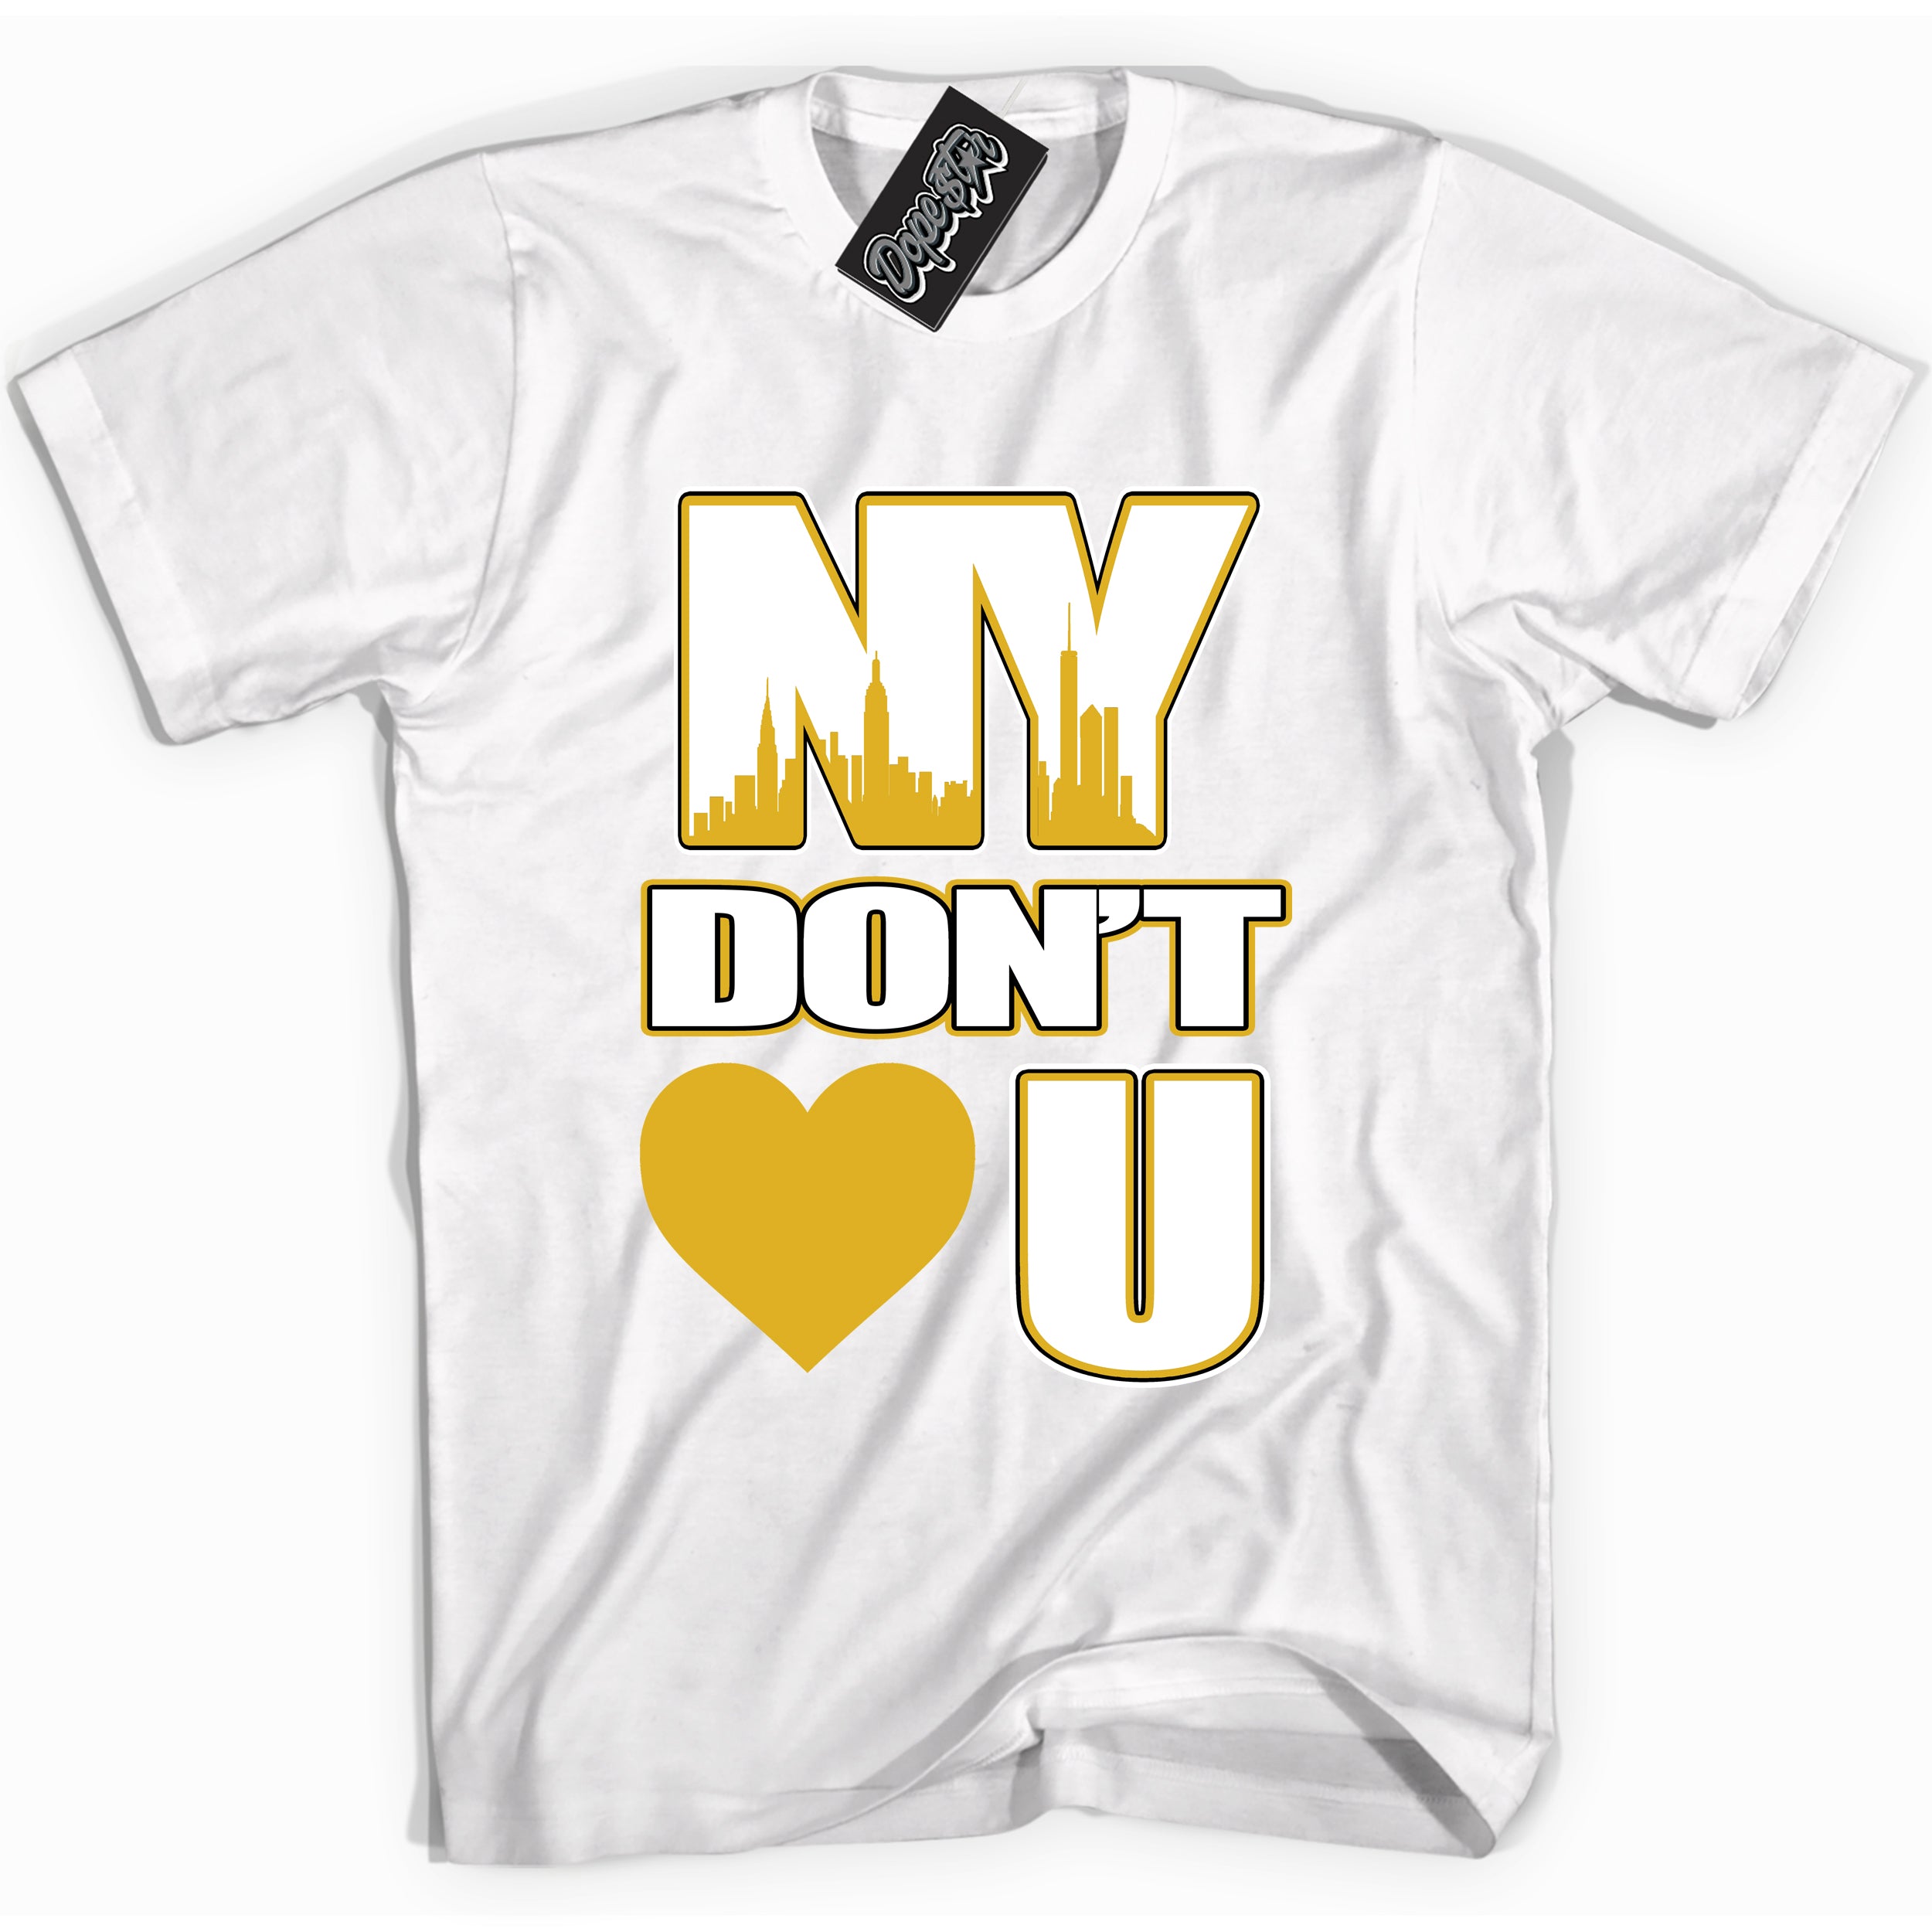 Cool White Shirt With NY Don’t Love  design That Perfectly Matches YELLOW OCHRE 6s Sneakers.